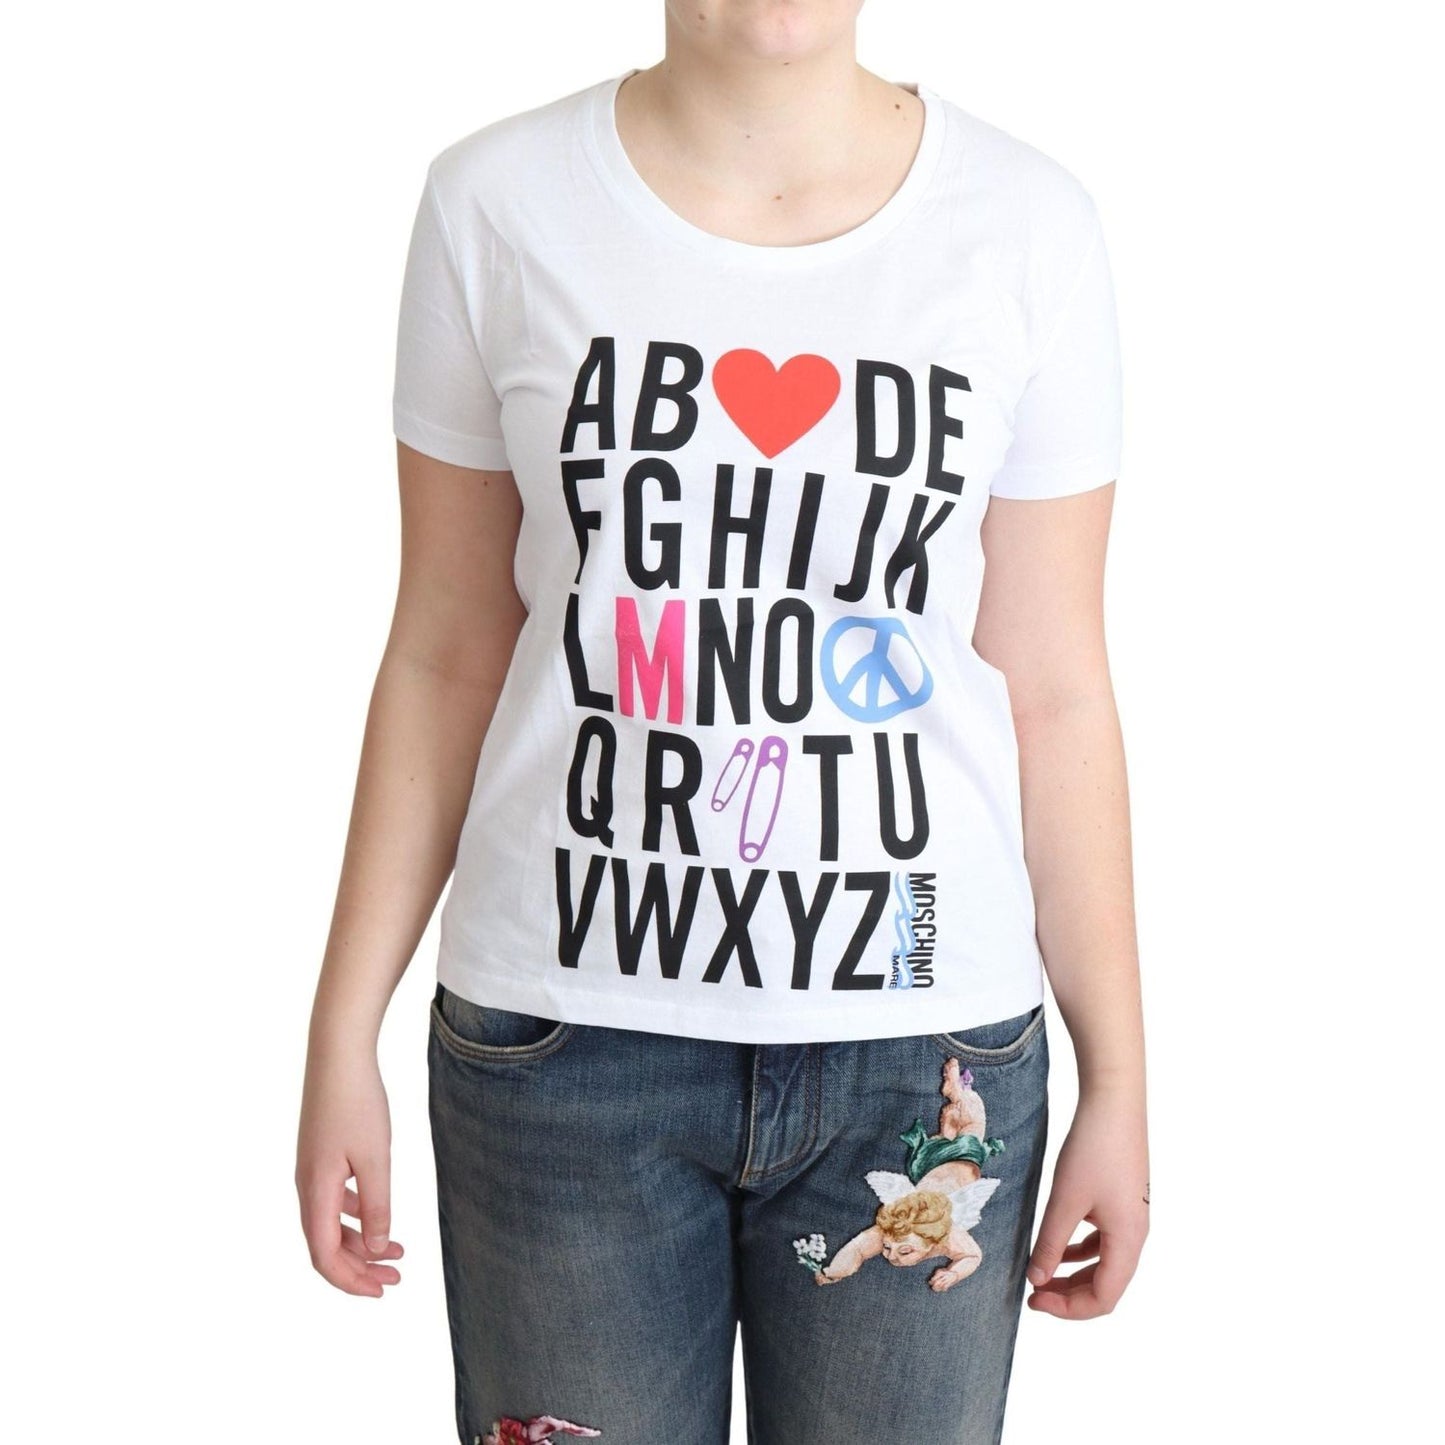 Moschino Chic Alphabet Print Cotton Tee white-cotton-alphabet-letter-print-tops-t-shirt IMG_0934-1-scaled-54a63d34-ff2.jpg